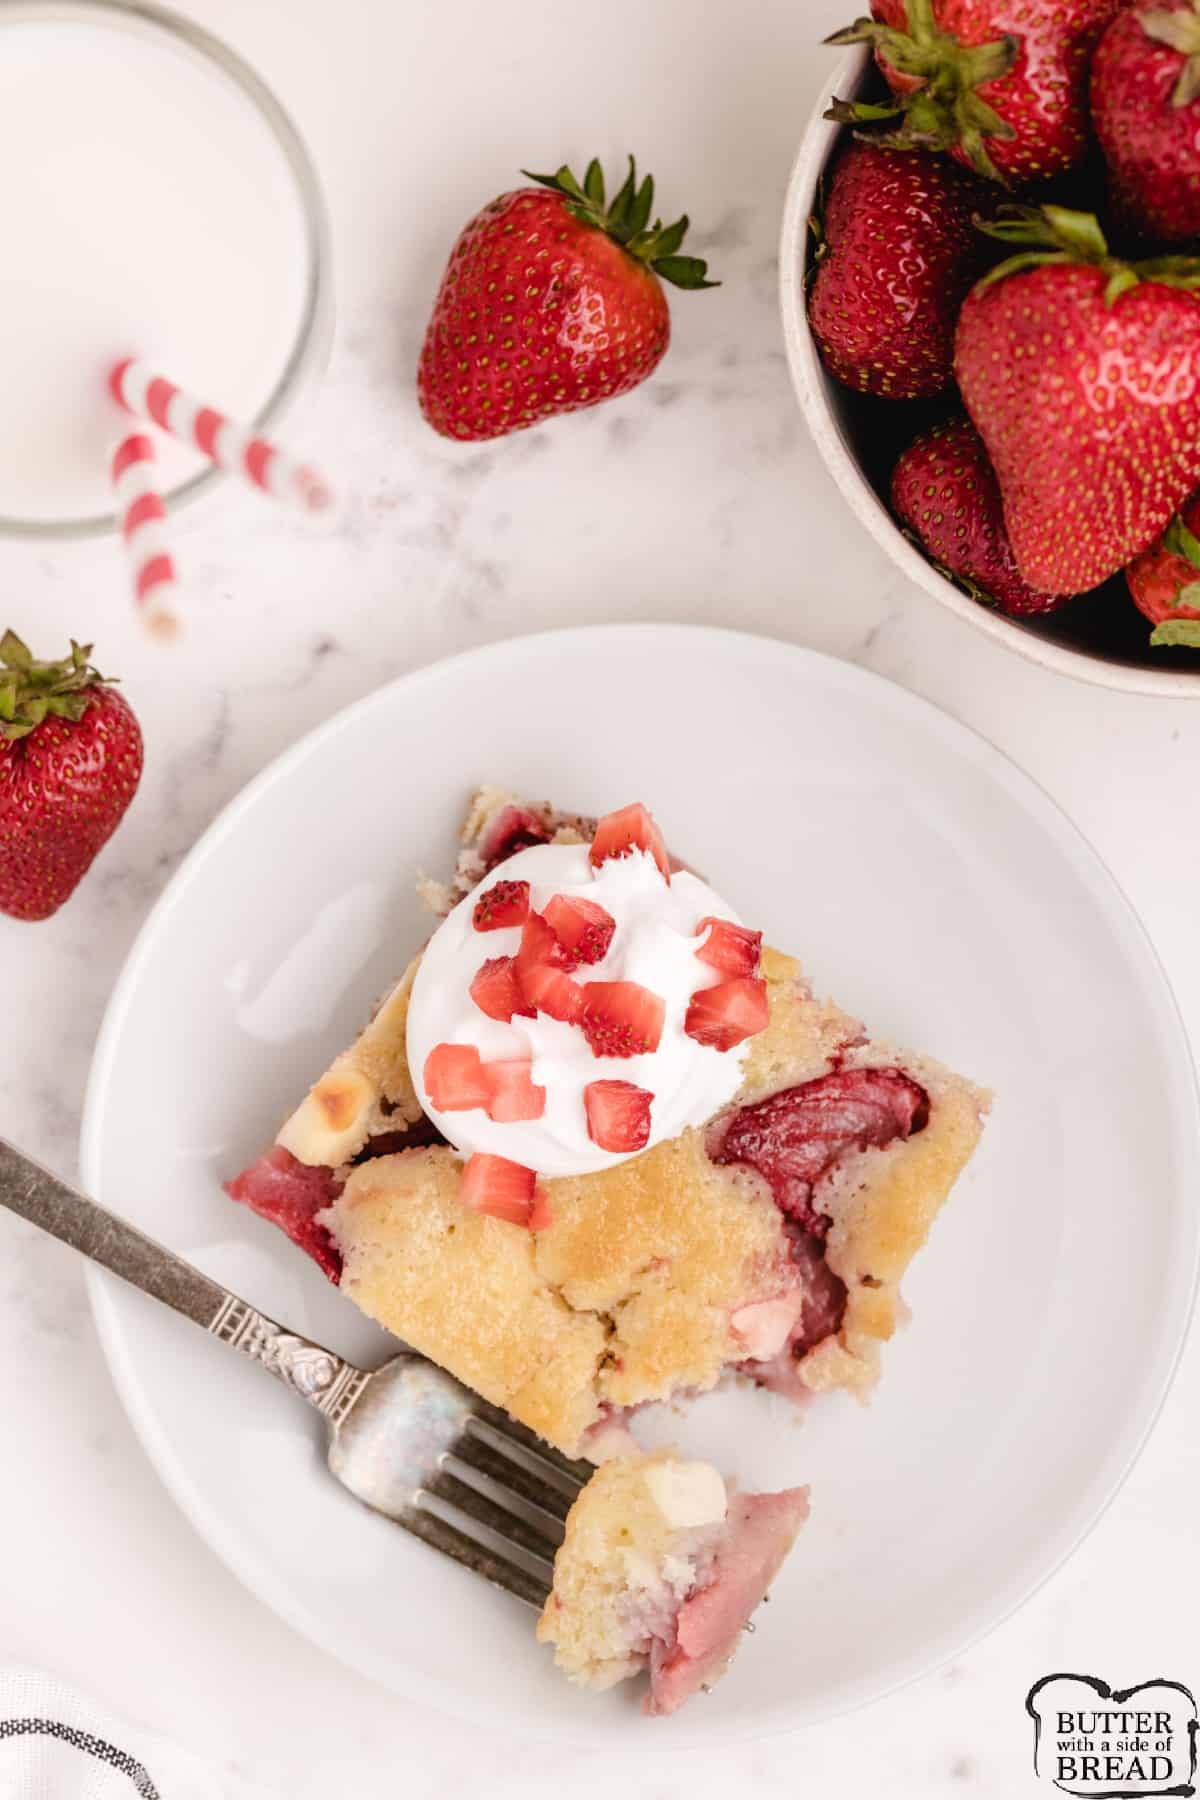 Cobbler made with strawberries and cream cheese